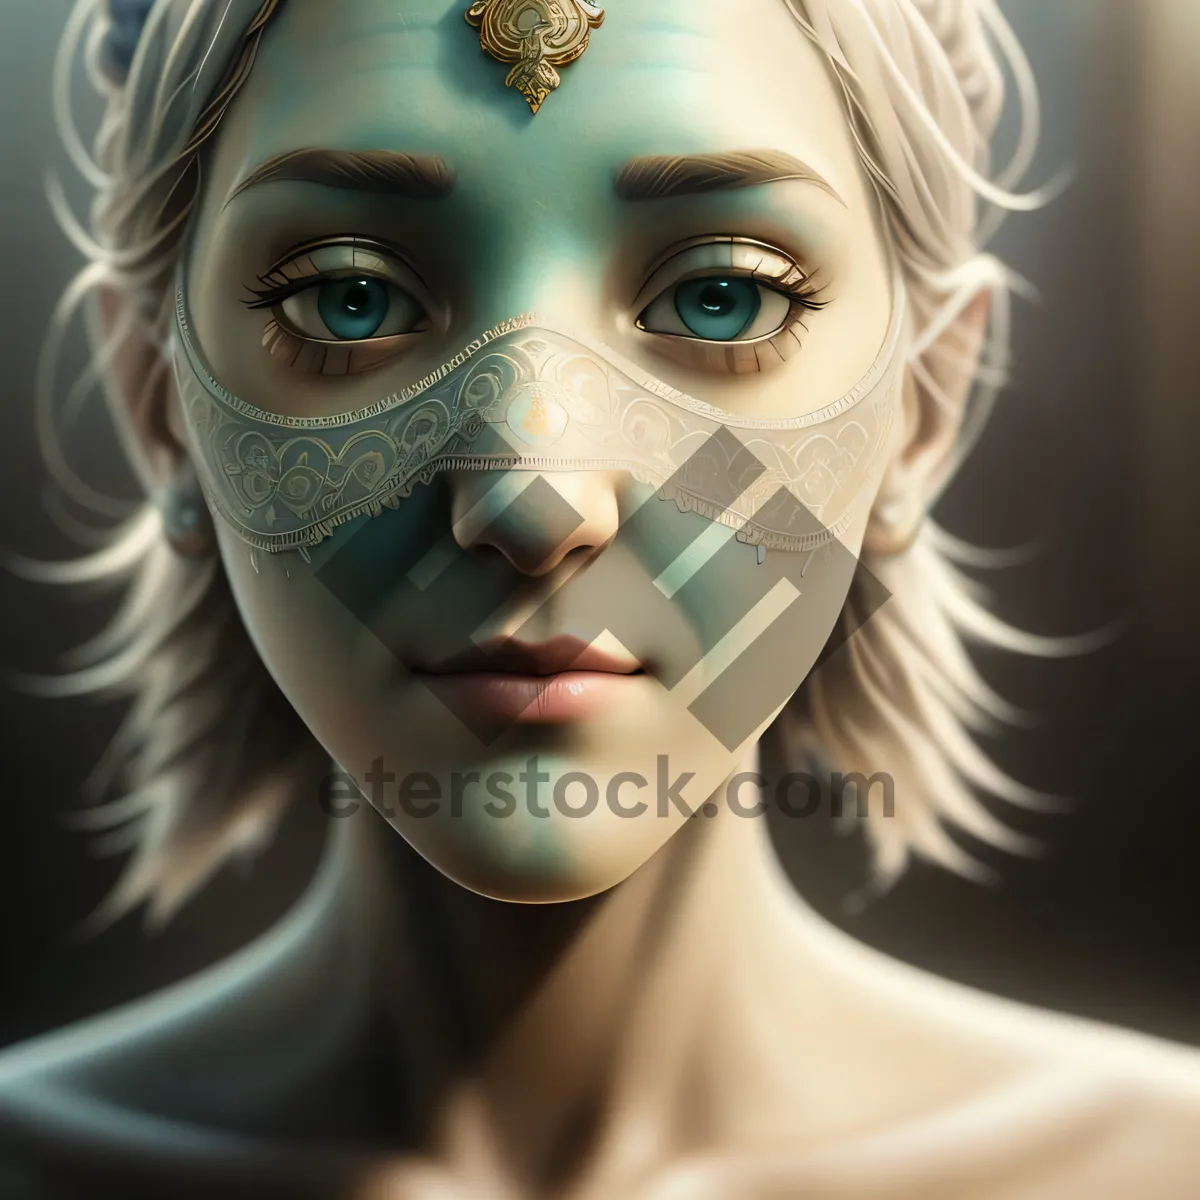 Picture of Stylish Fashion Model with Attractive Makeup and Mask